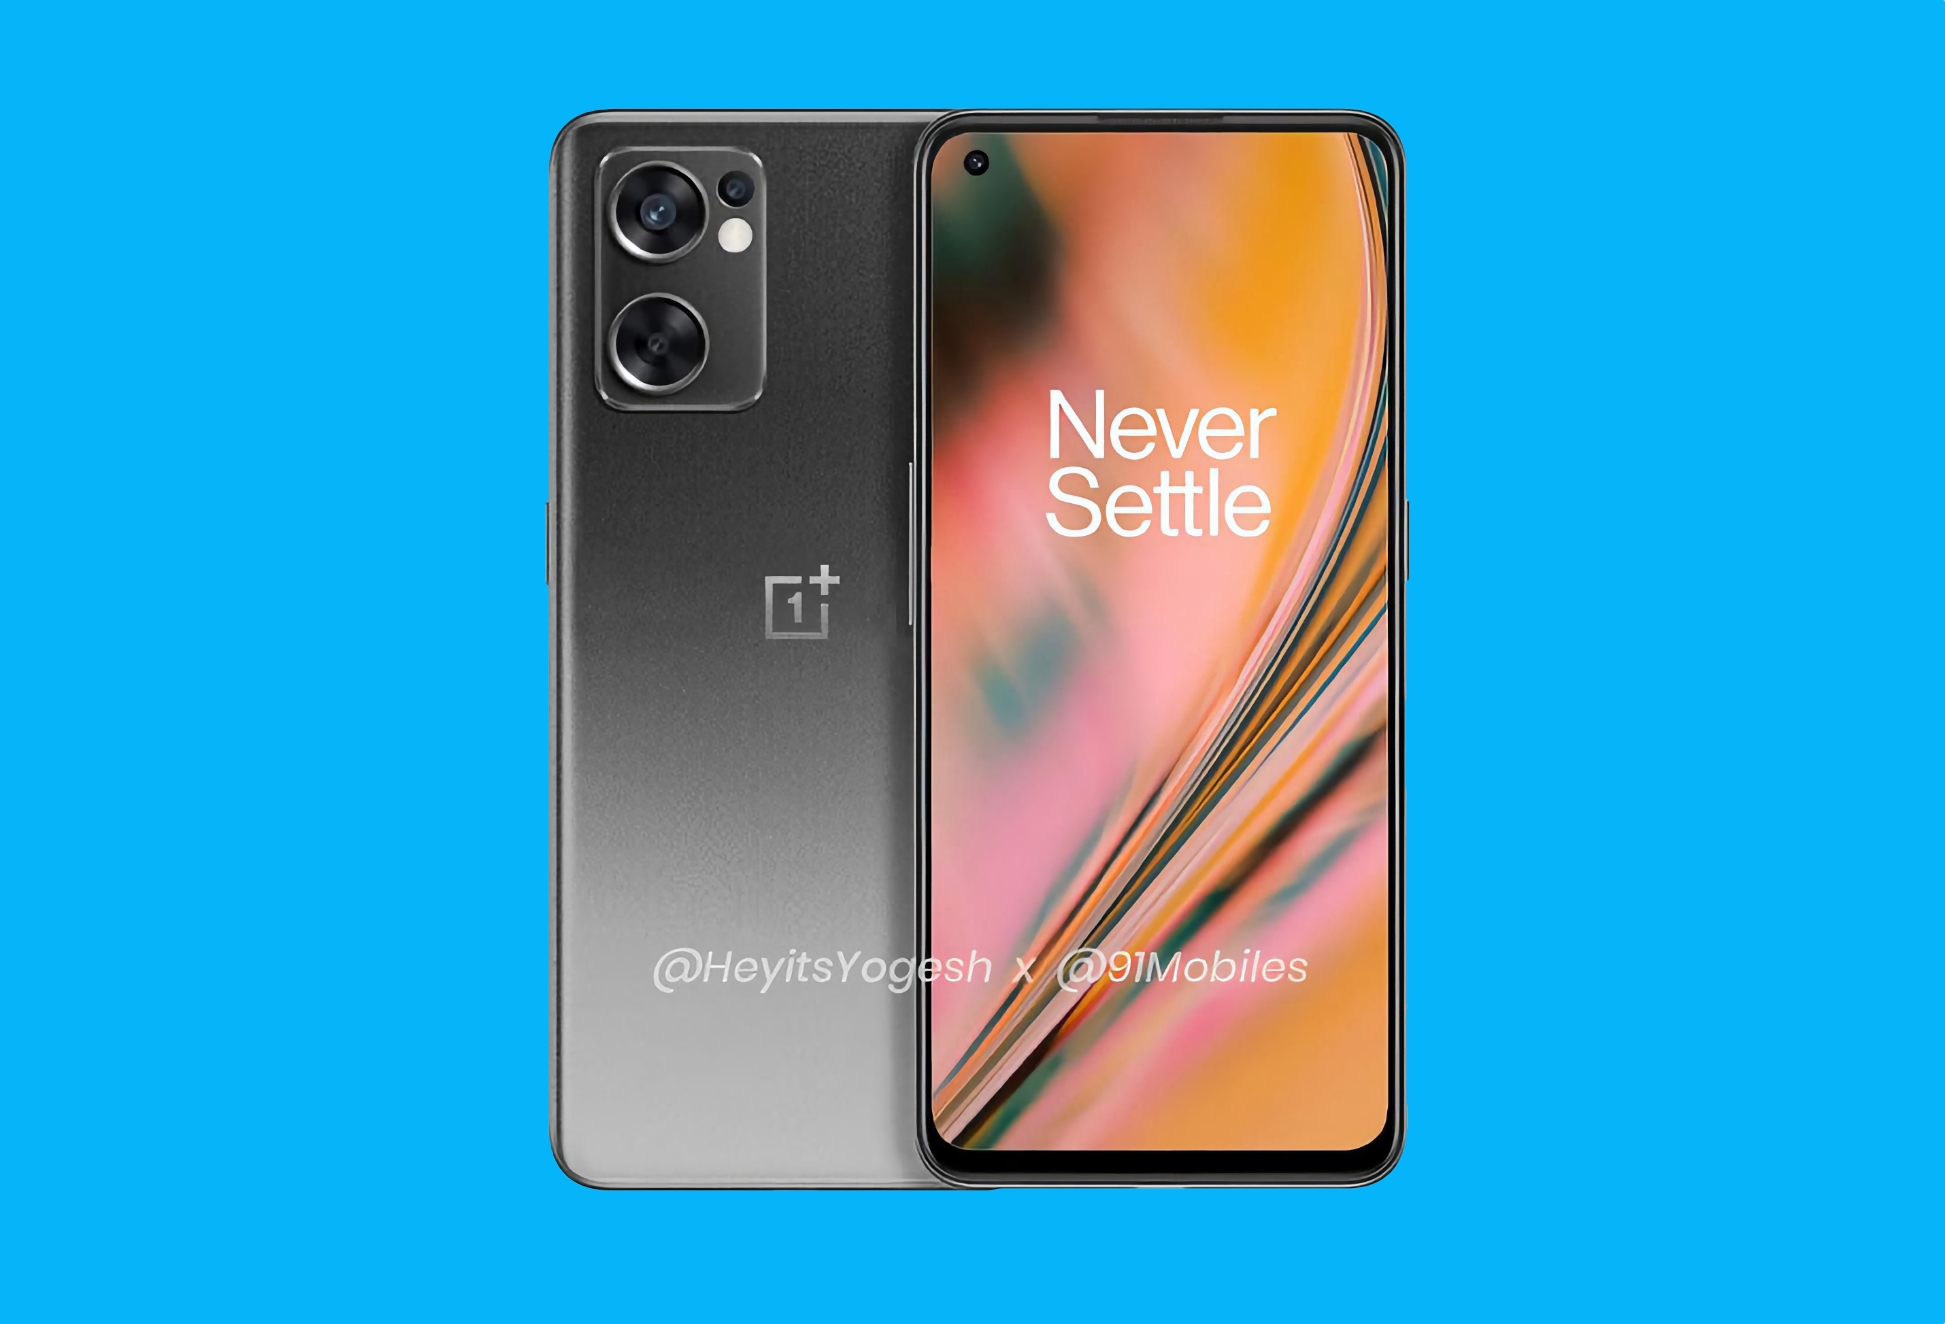 Official: OnePlus Nord CE 2 with AMOLED screen, Dimensity 900 chip and 65W charging will be presented on February 17